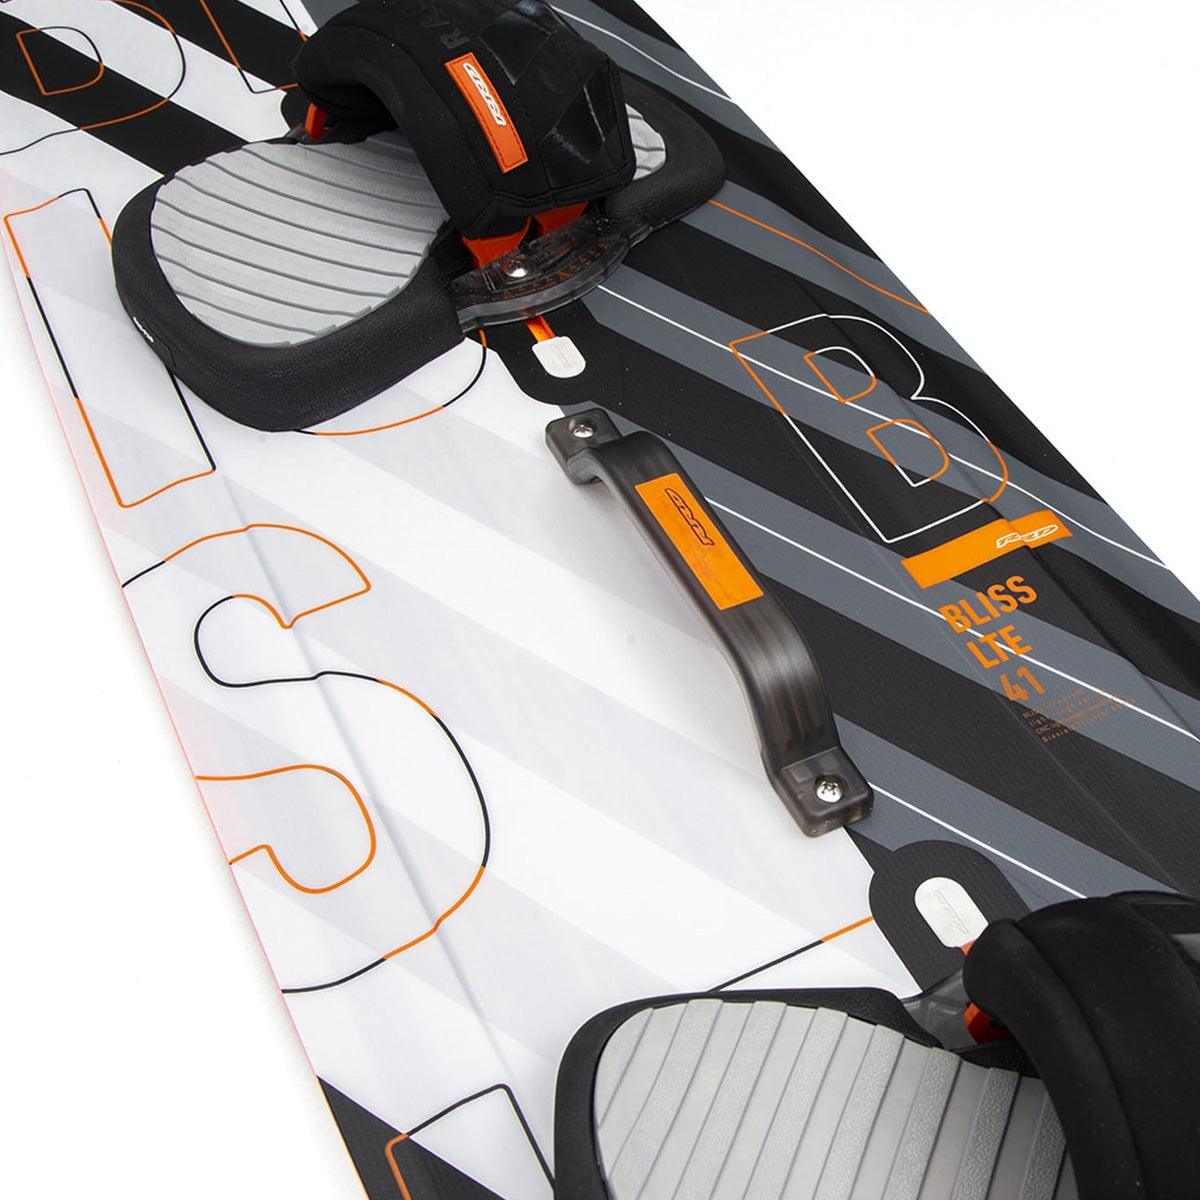 RRD Passion / Bliss Package - Powerkiteshop